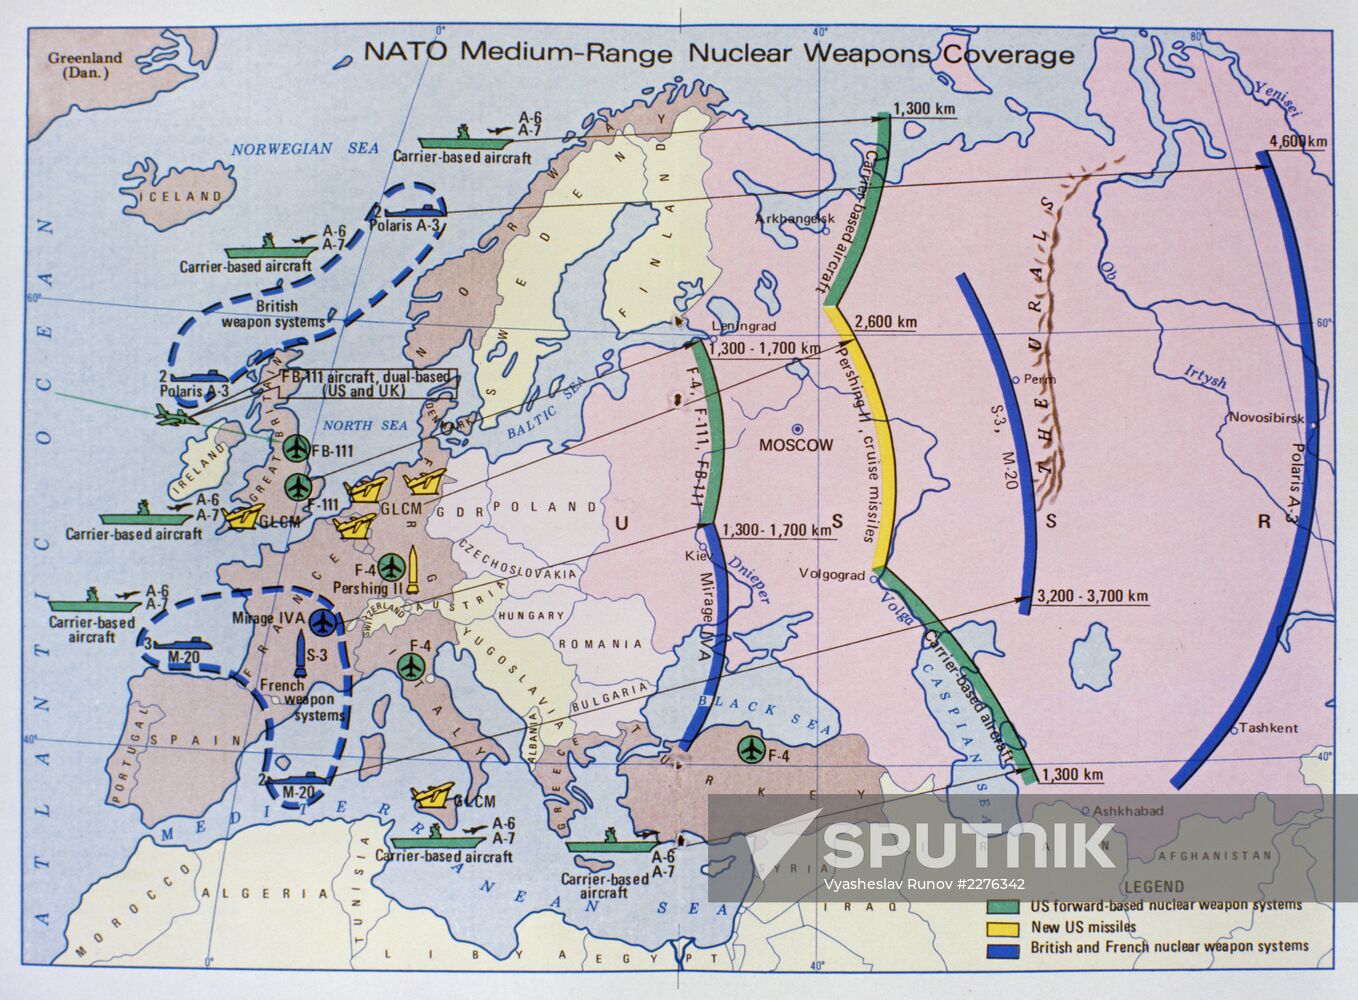 NATO medium-range nuclear weapons coverage